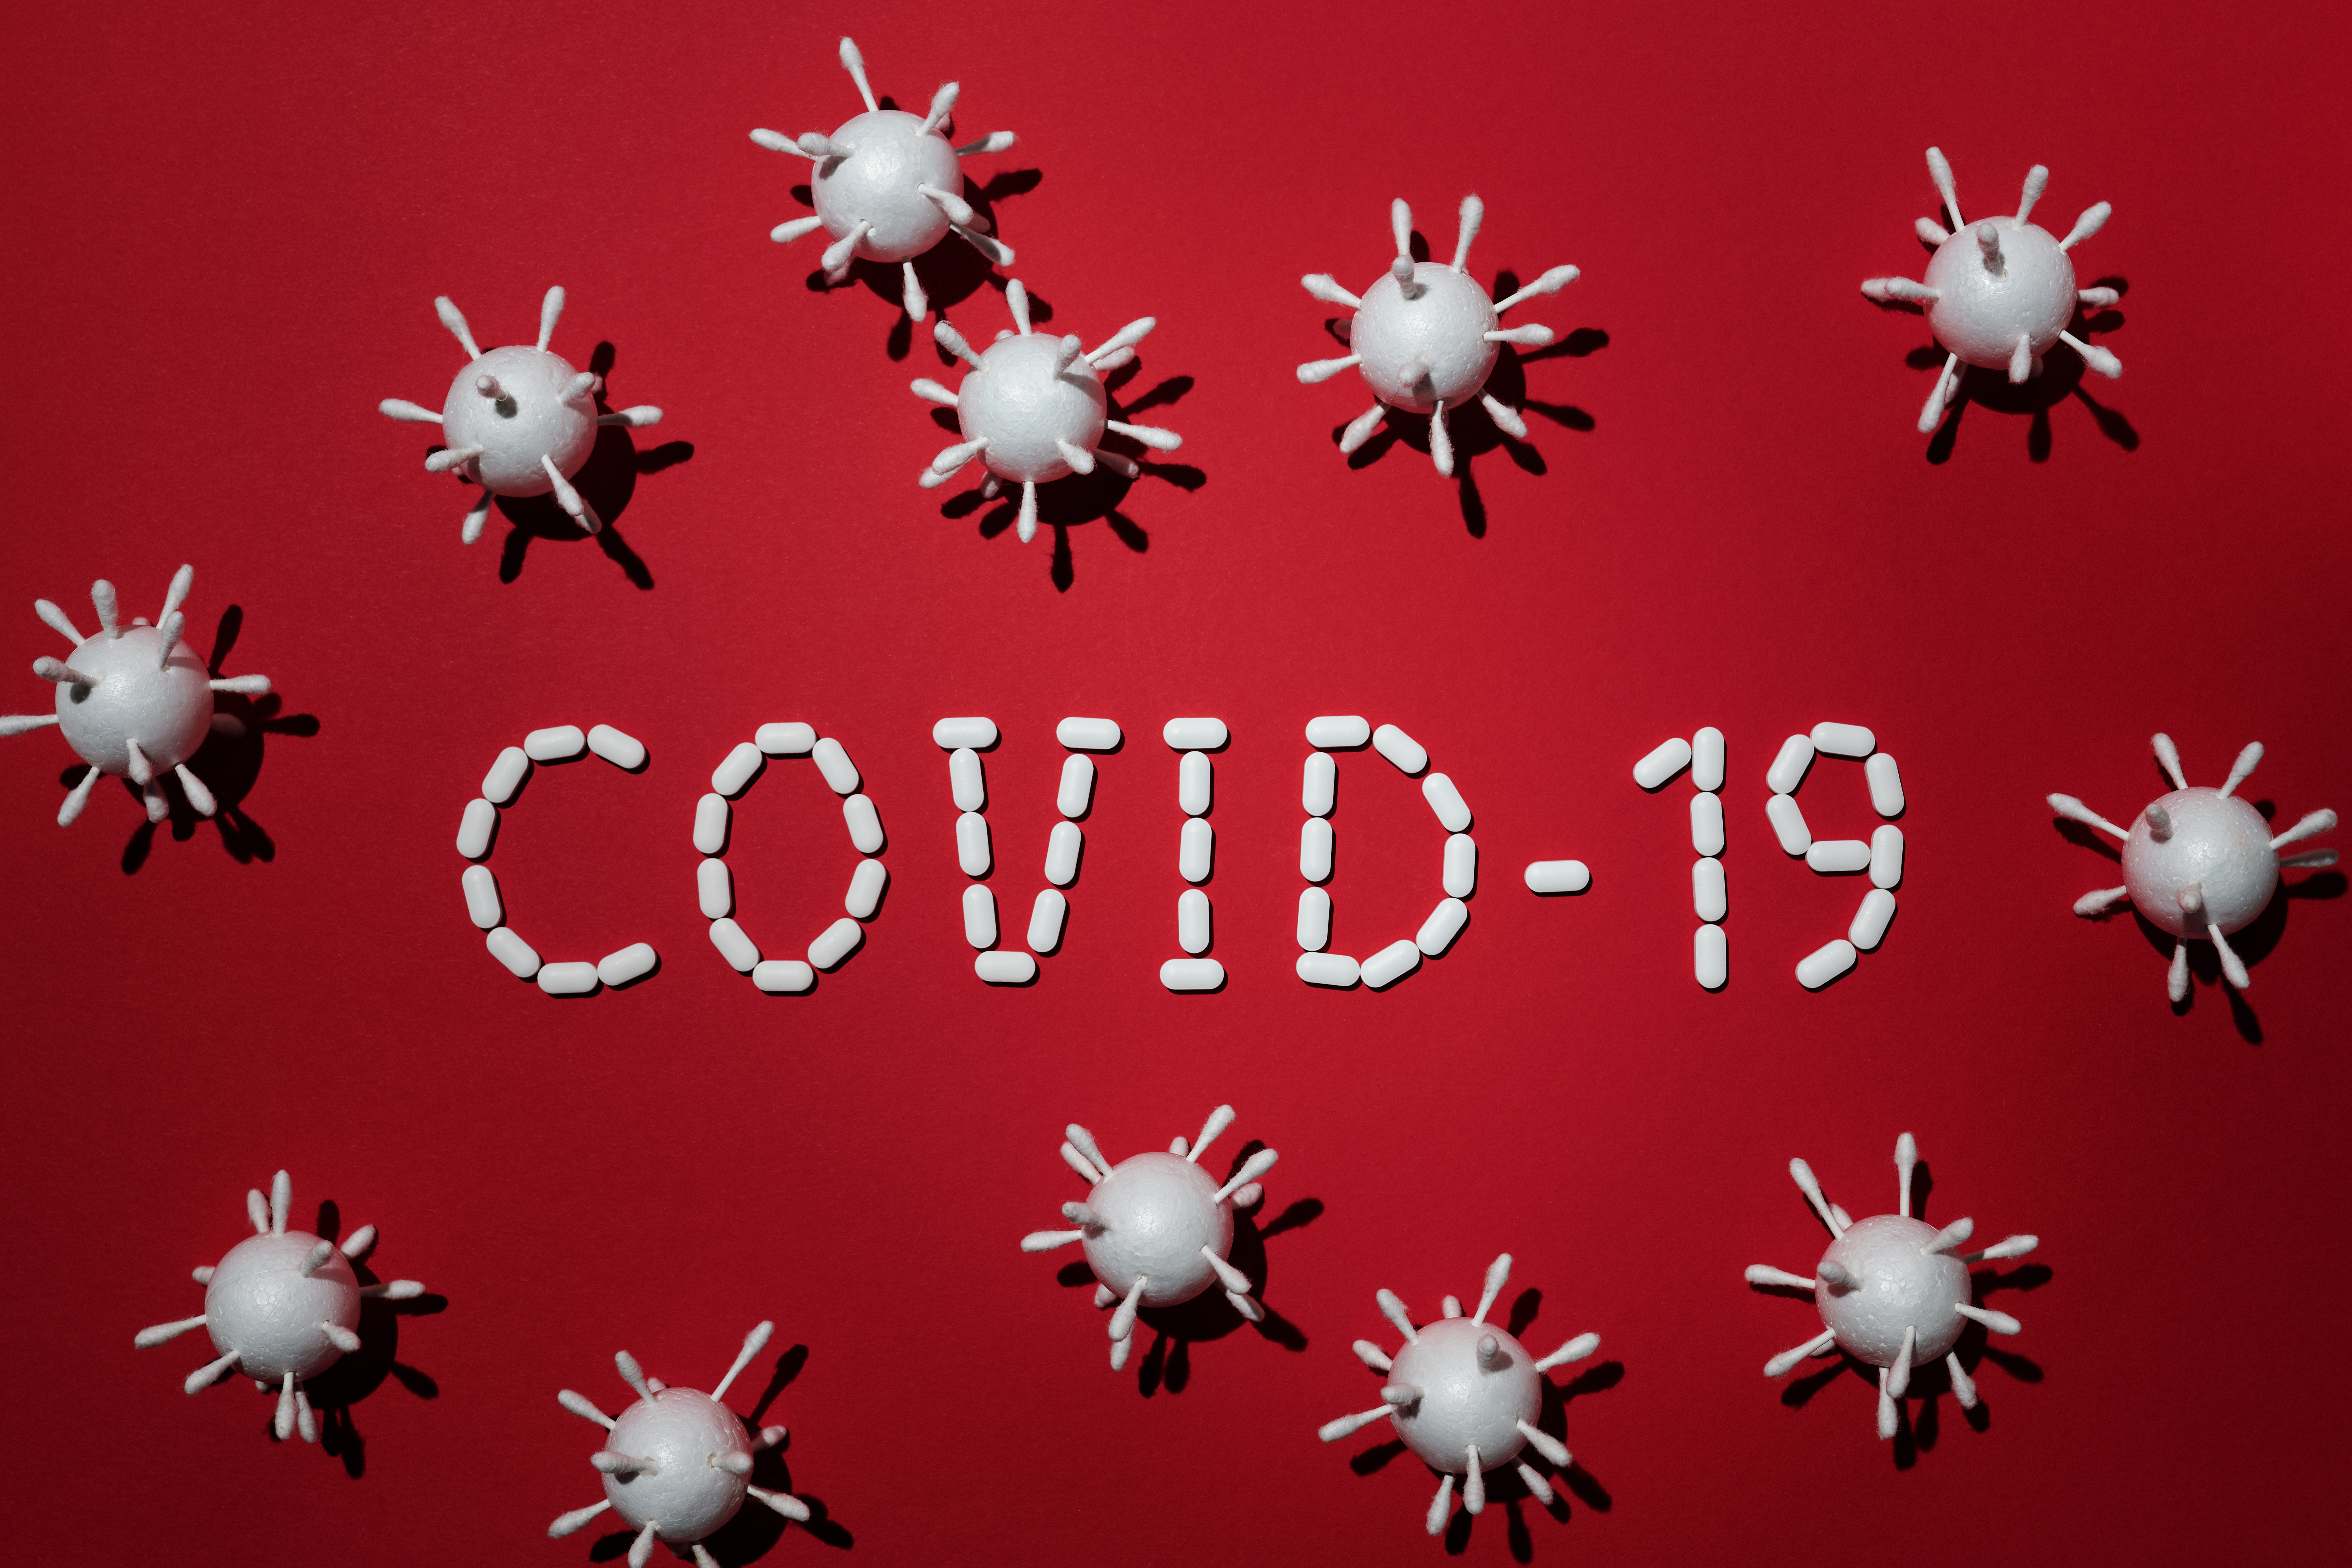 A red banner with COVID-19 text and molecular structural models of the virus in white.